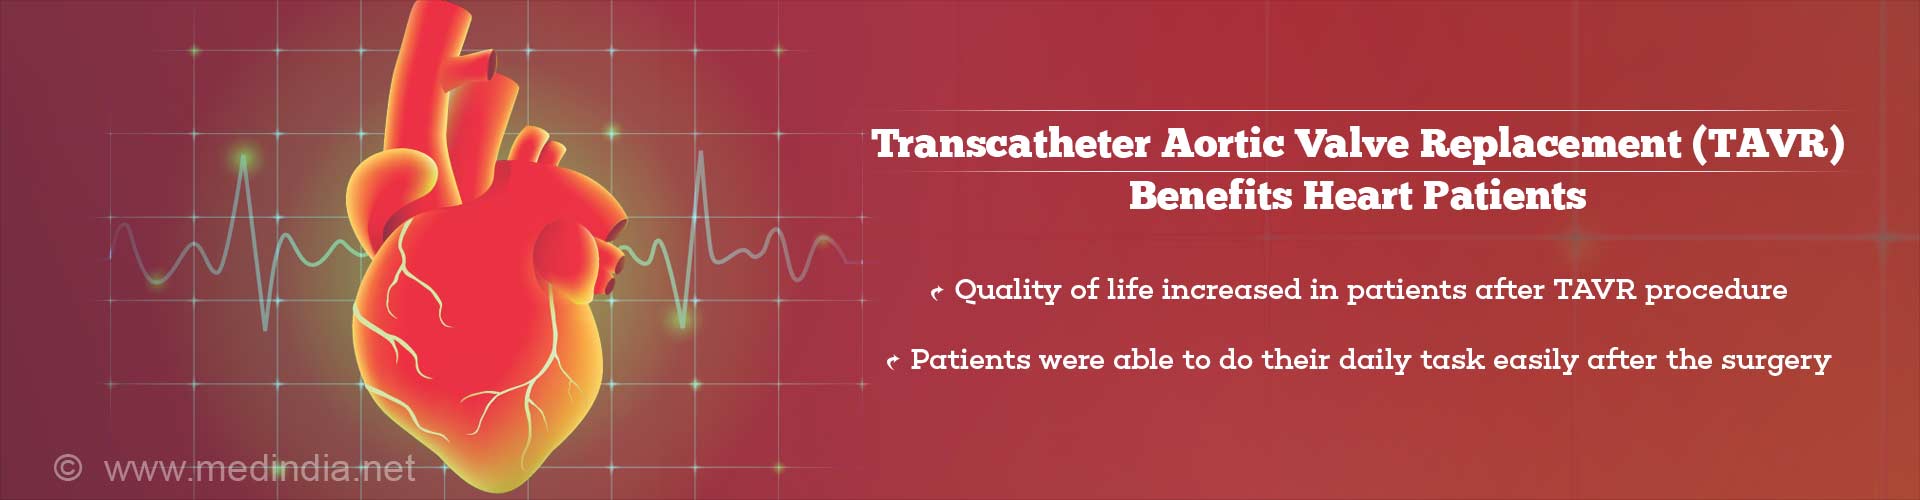 transcatheter aortic valve replacement (tavr) benefits heart patients
- quality of life increased in patients after tavr procedure
- patients were able to do their daily task easily after the surgery
